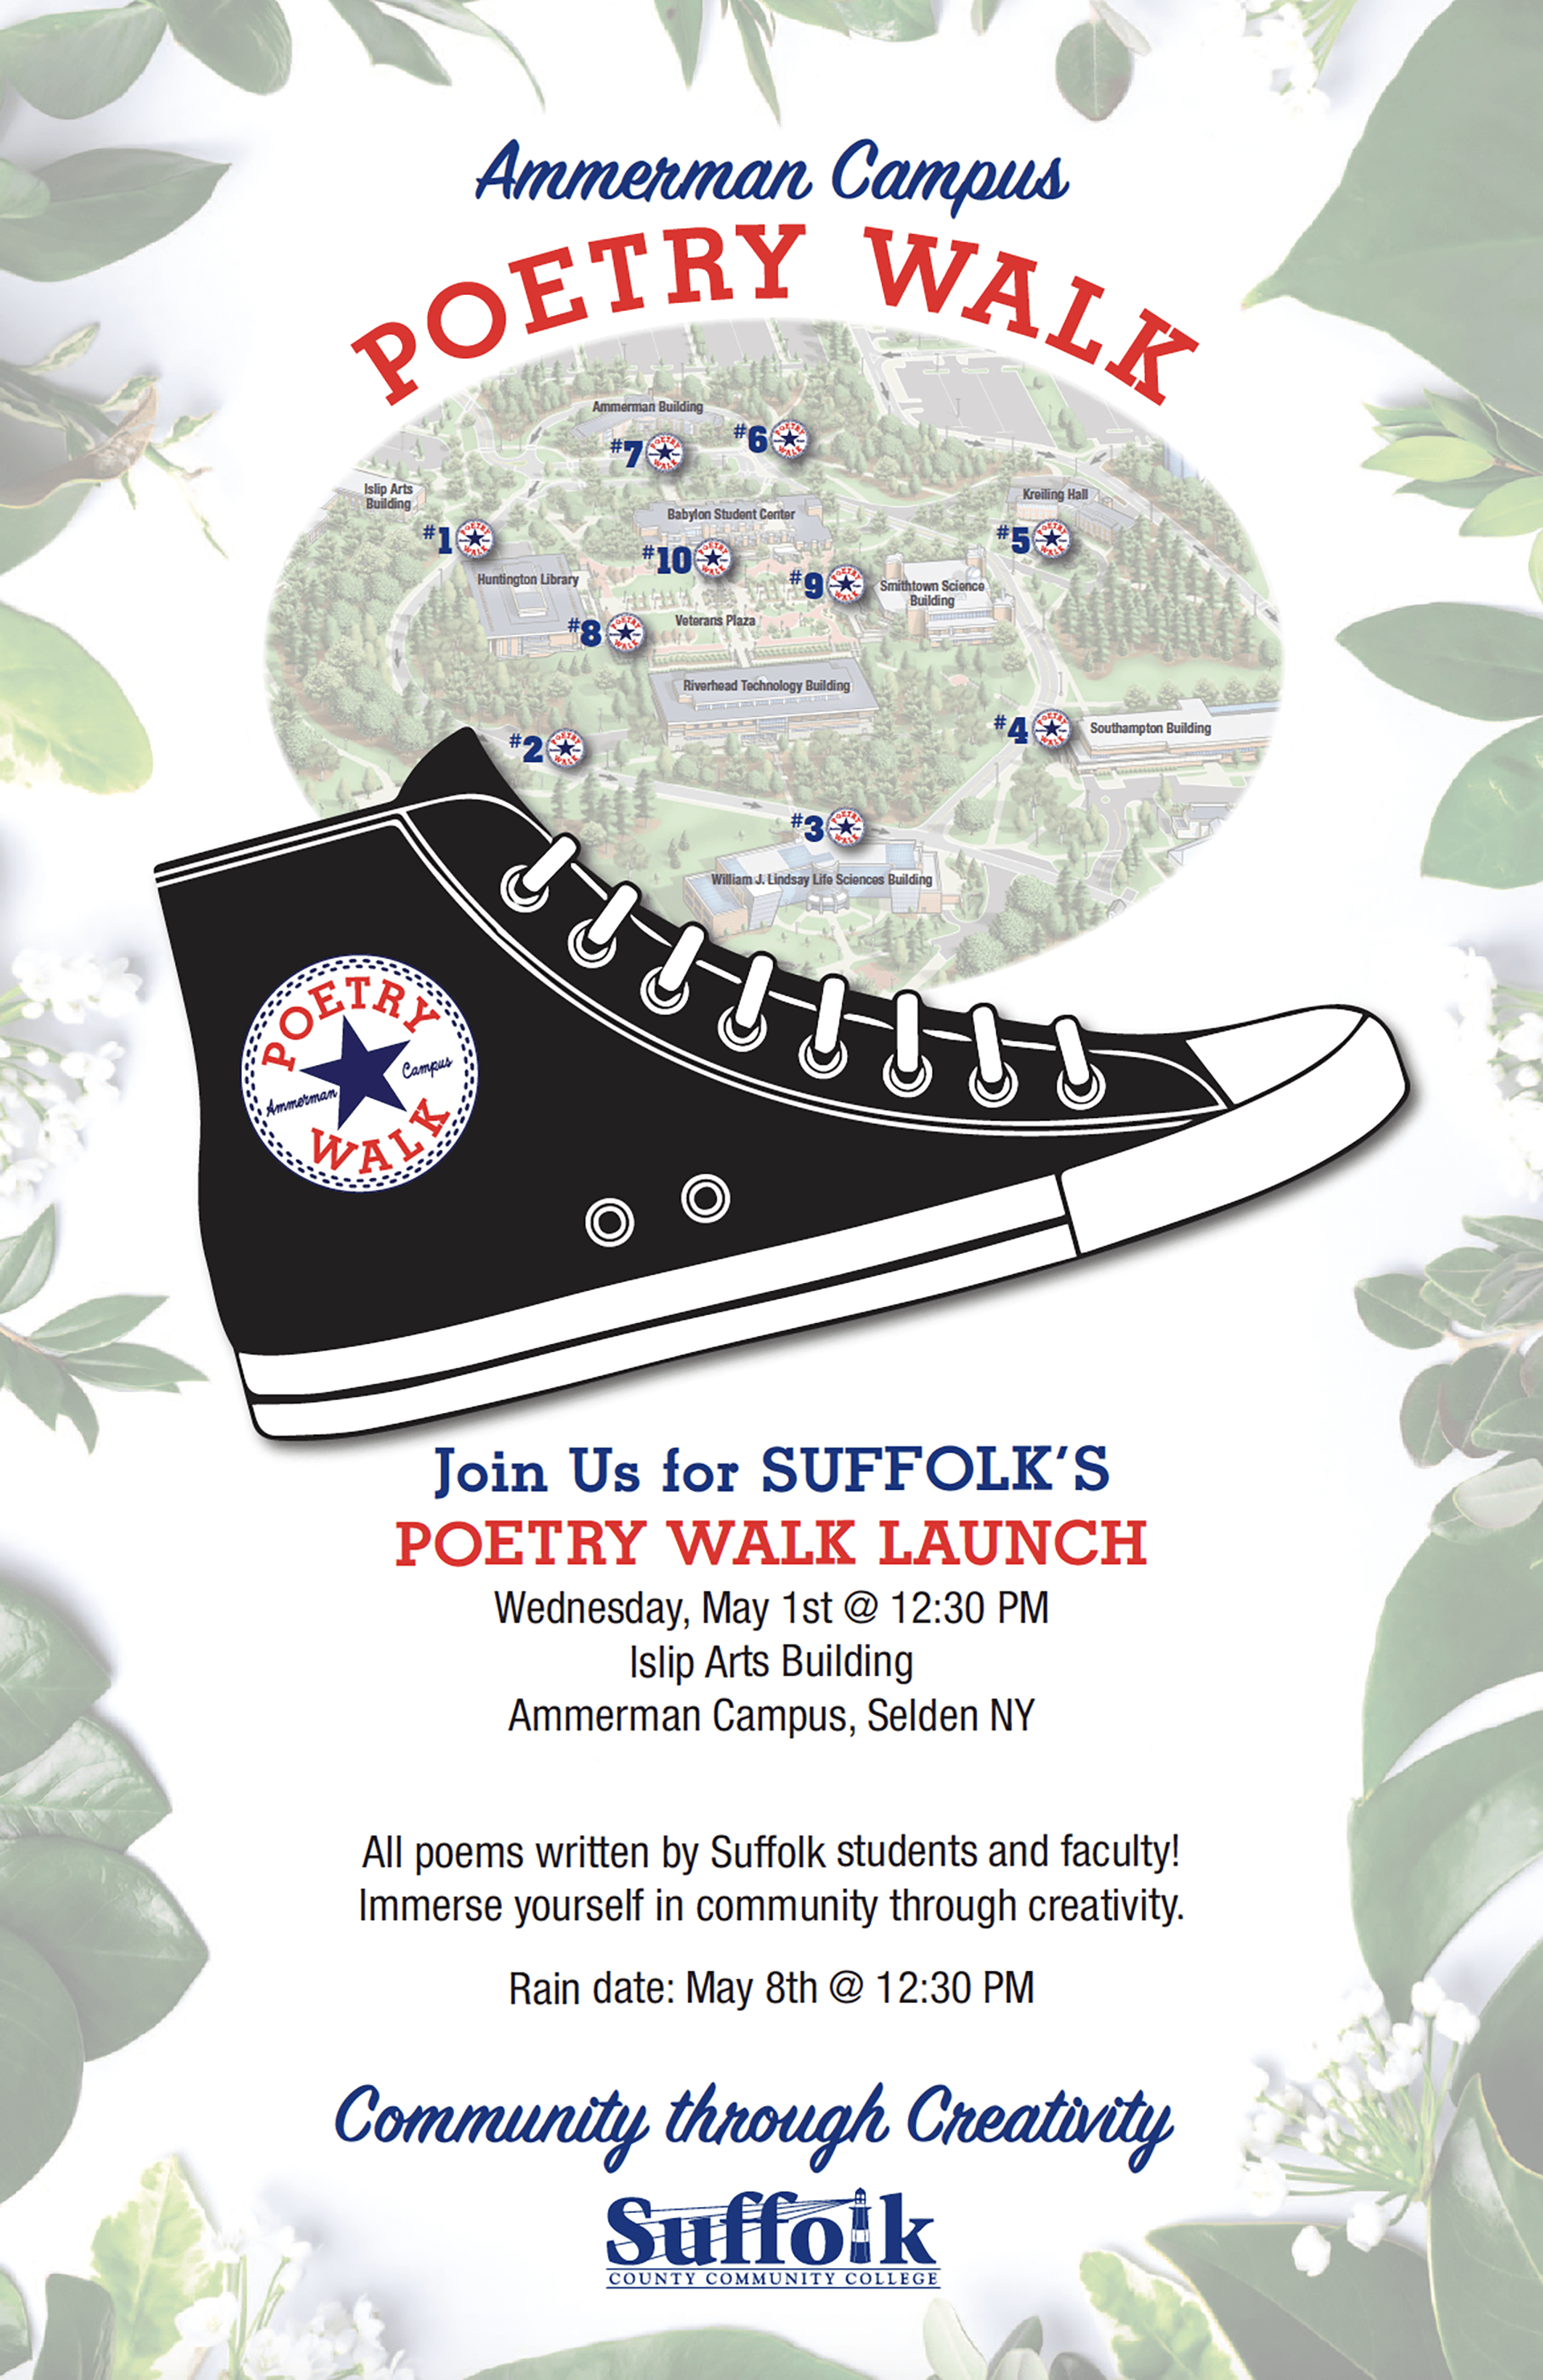 Join us for Suffolk's Poetry Walk Launch Wednesday, May 1st at 12:30 PM at the Islip Arts Building, Ammerman Campus, Selden, NY. All poems written by Suffolk students and faculty! Immerse yourself in community through creativity. Rain date: May 8th at 12:30 p.m.